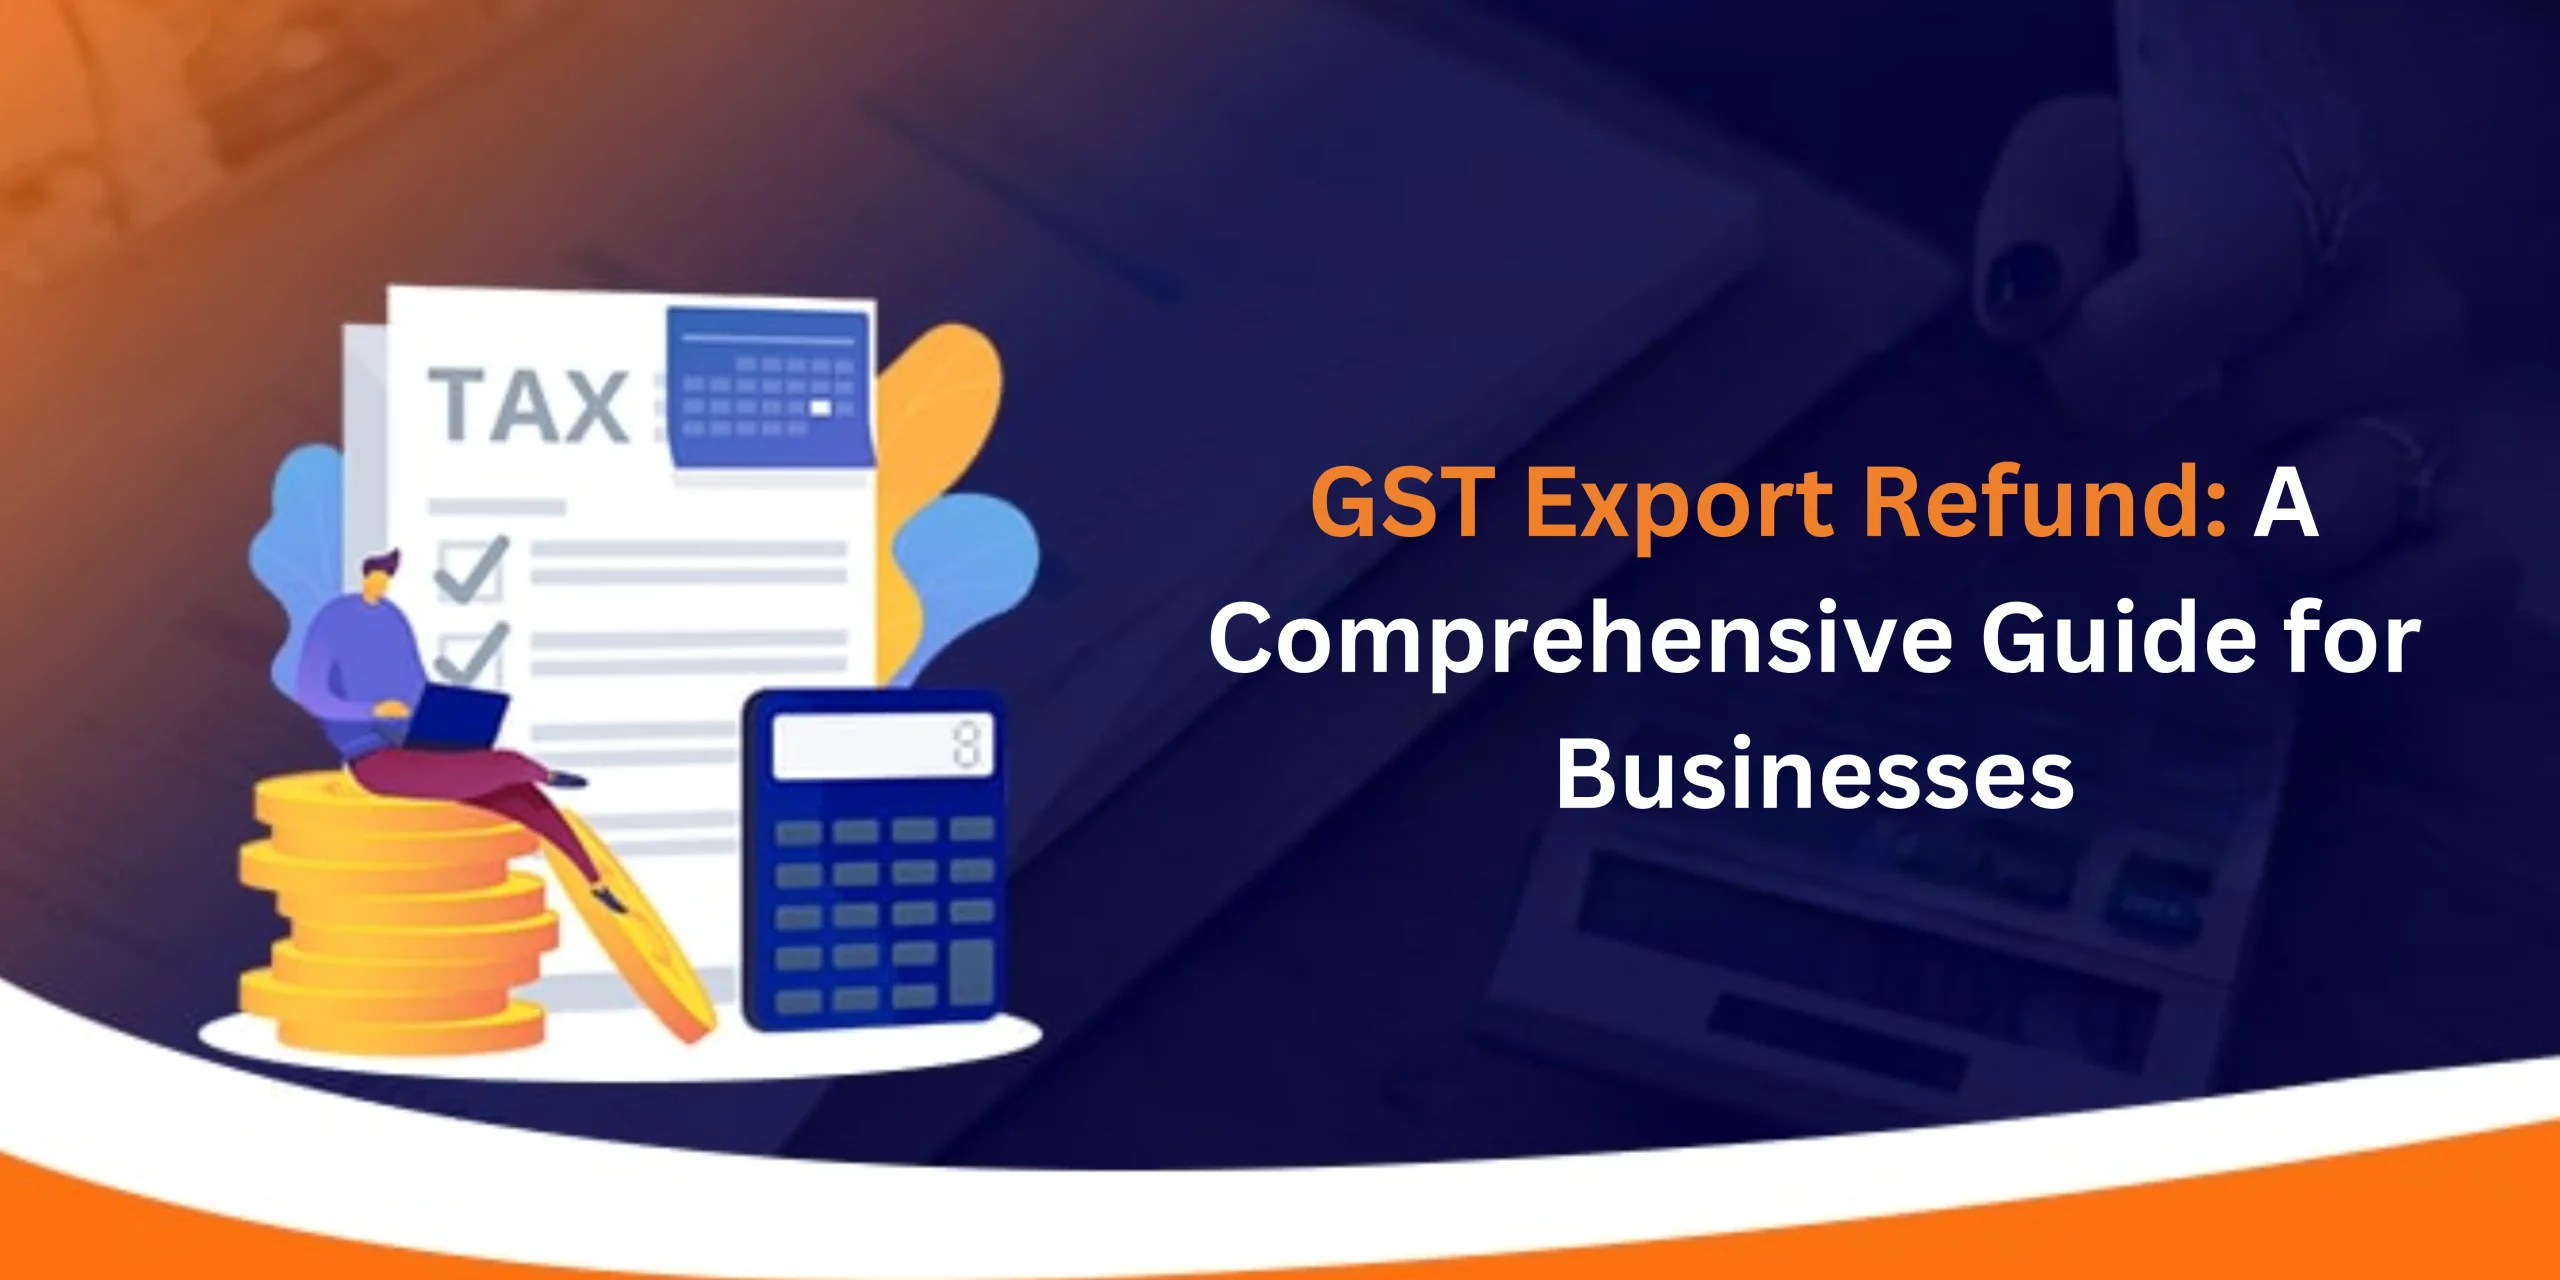 Understanding the Benefits of E-Invoicing Under GST